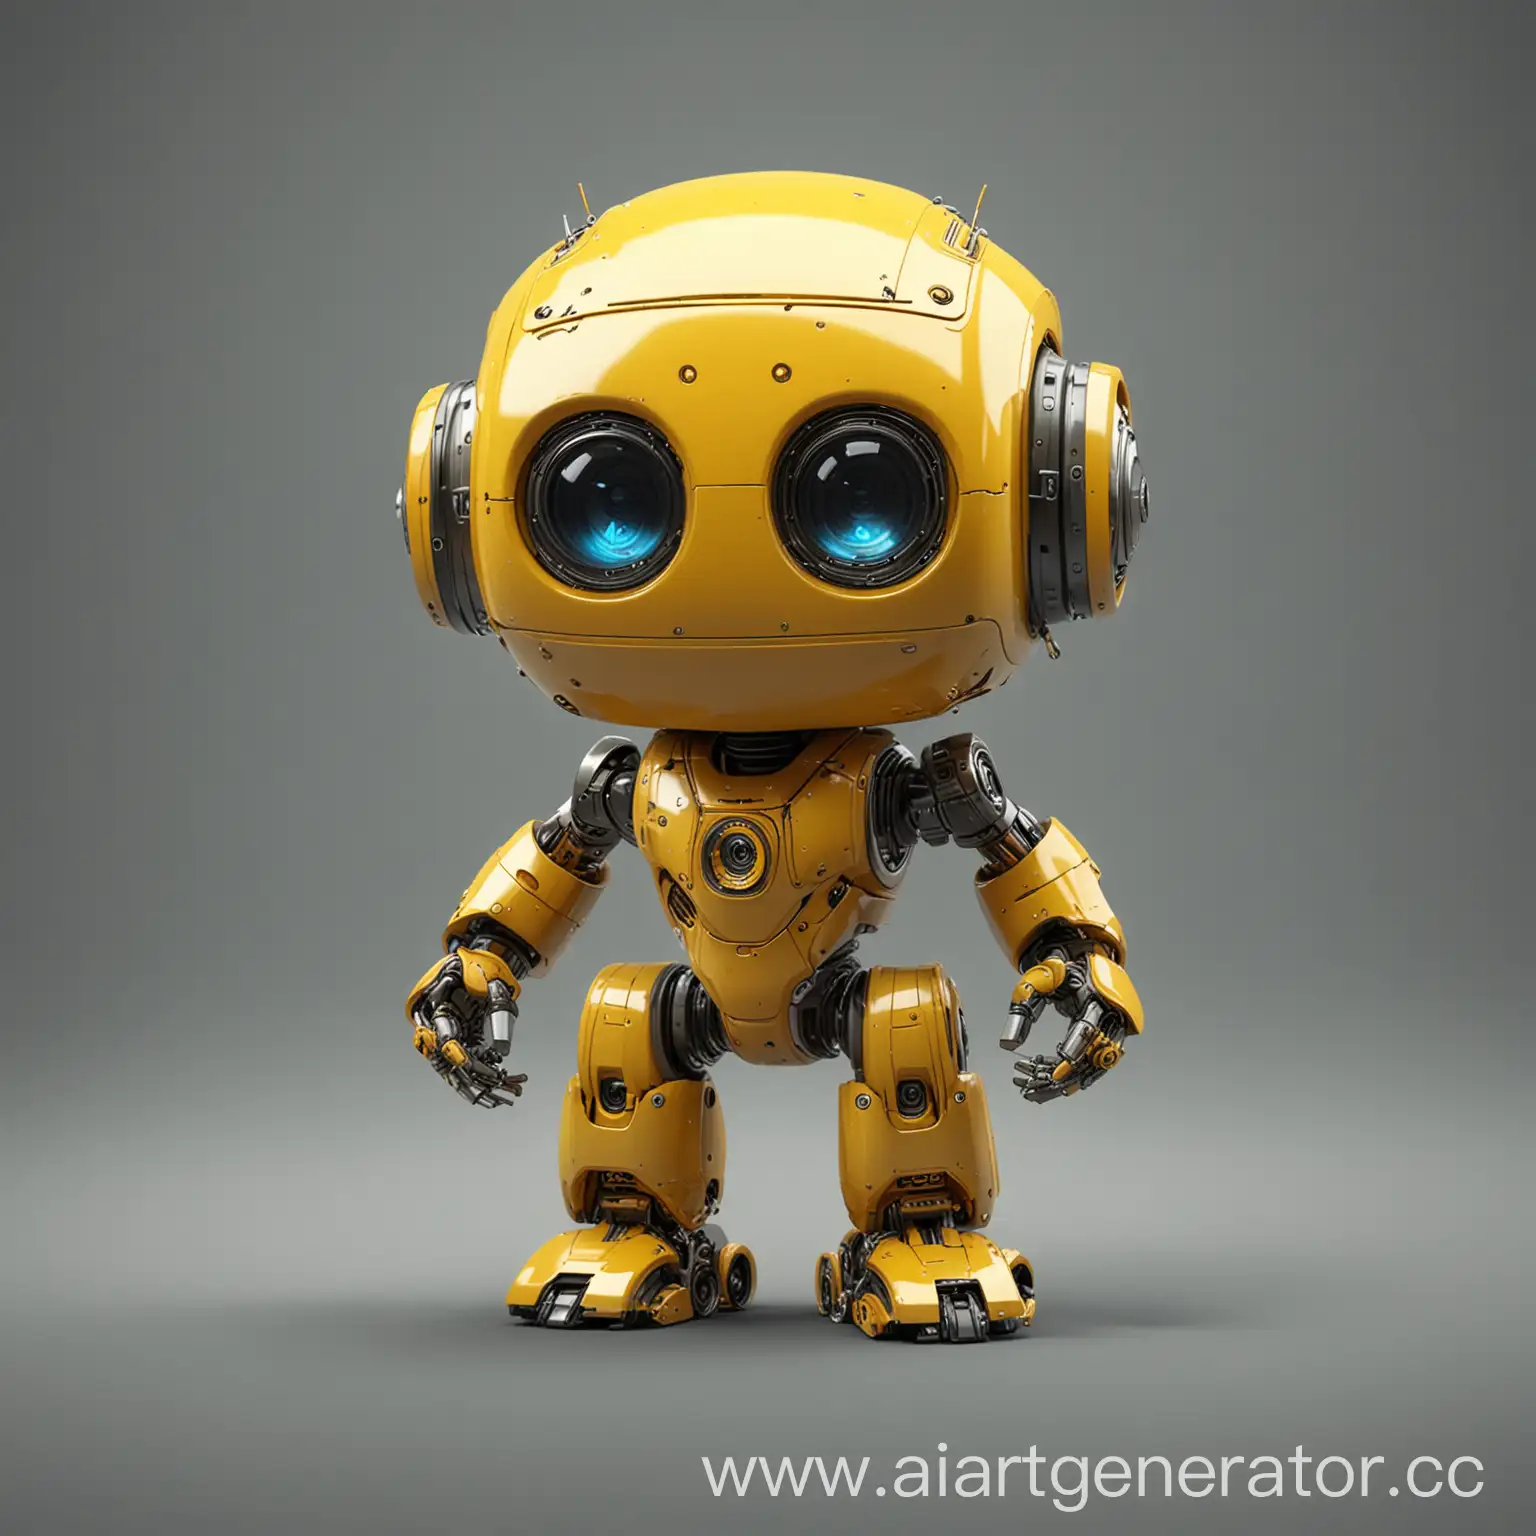 draw a yellow little robot of 8k quality in three quarters of a turn